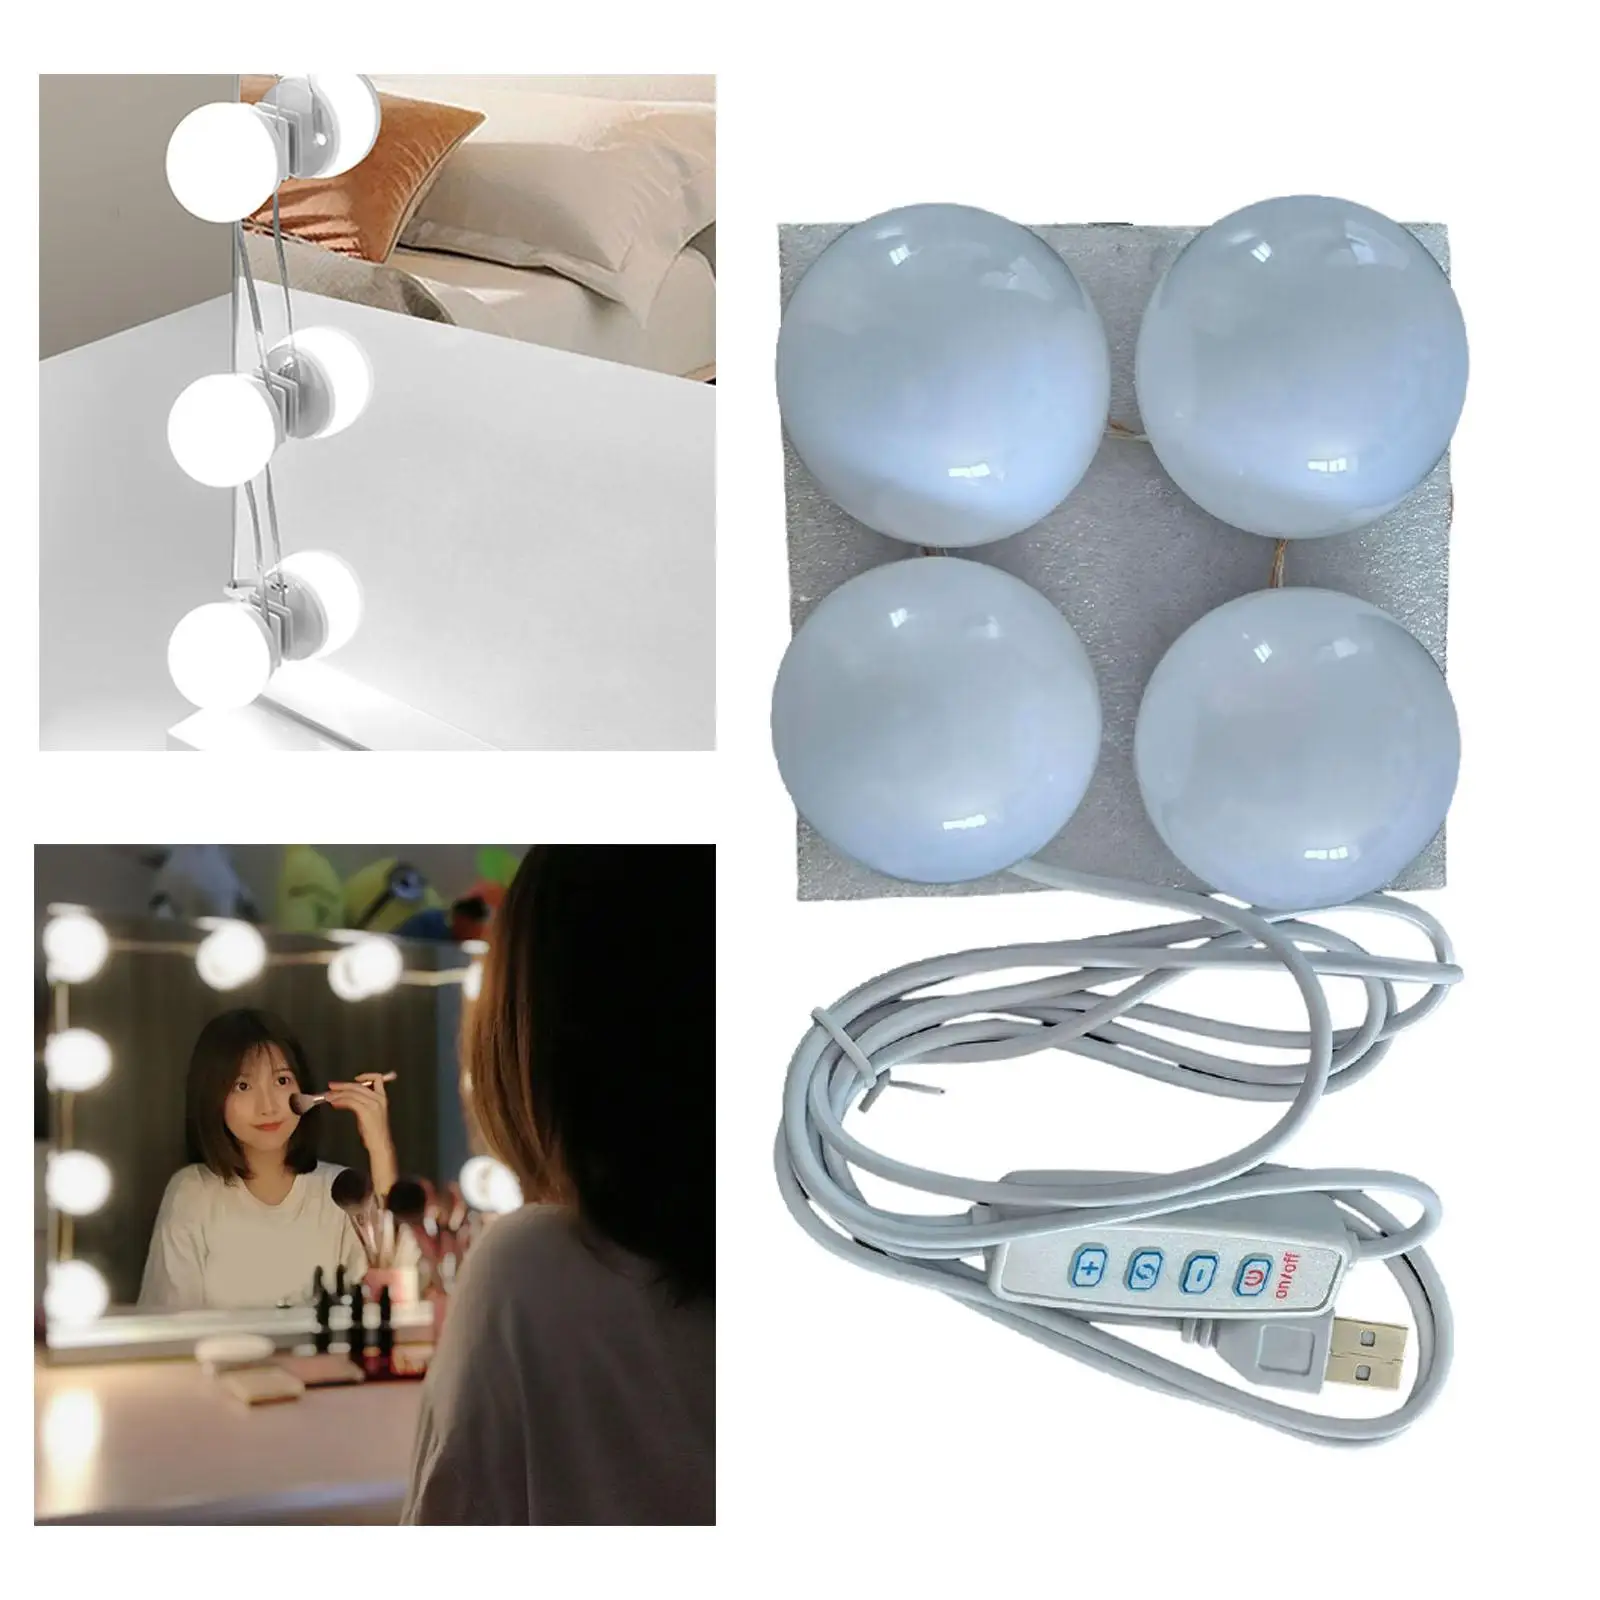 LED Makeup Mirror Lights Simple Dimmable Bulbs for Vanity Stick Bedroom Tabletop